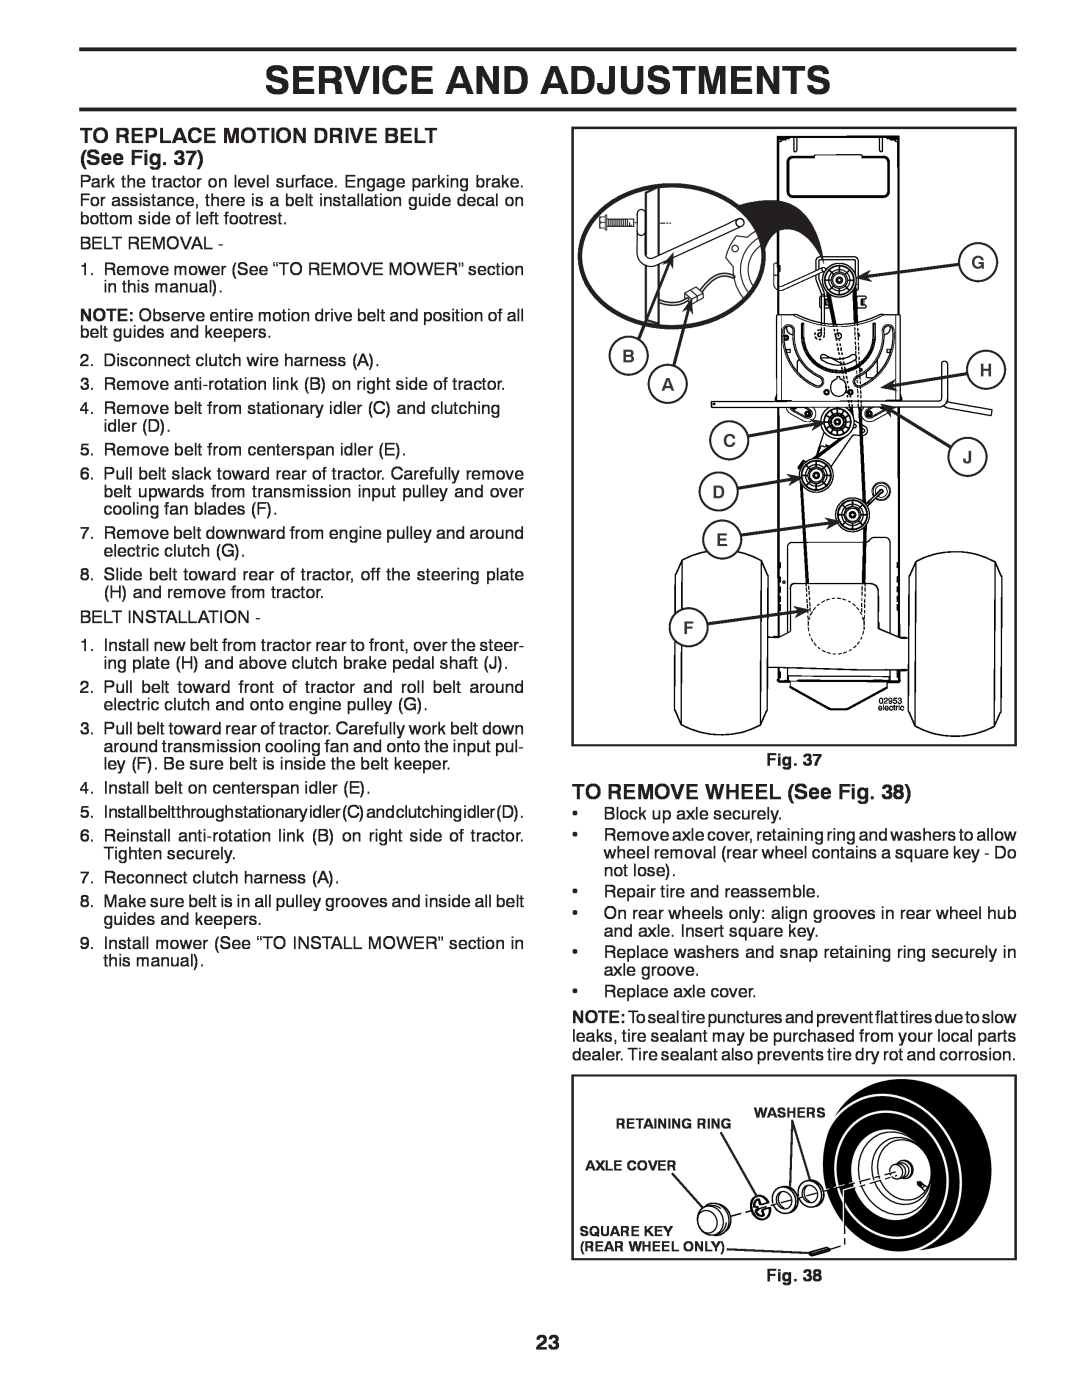 Poulan XT22H54 manual TO REPLACE MOTION DRIVE BELT See Fig, TO REMOVE WHEEL See Fig, Service And Adjustments 